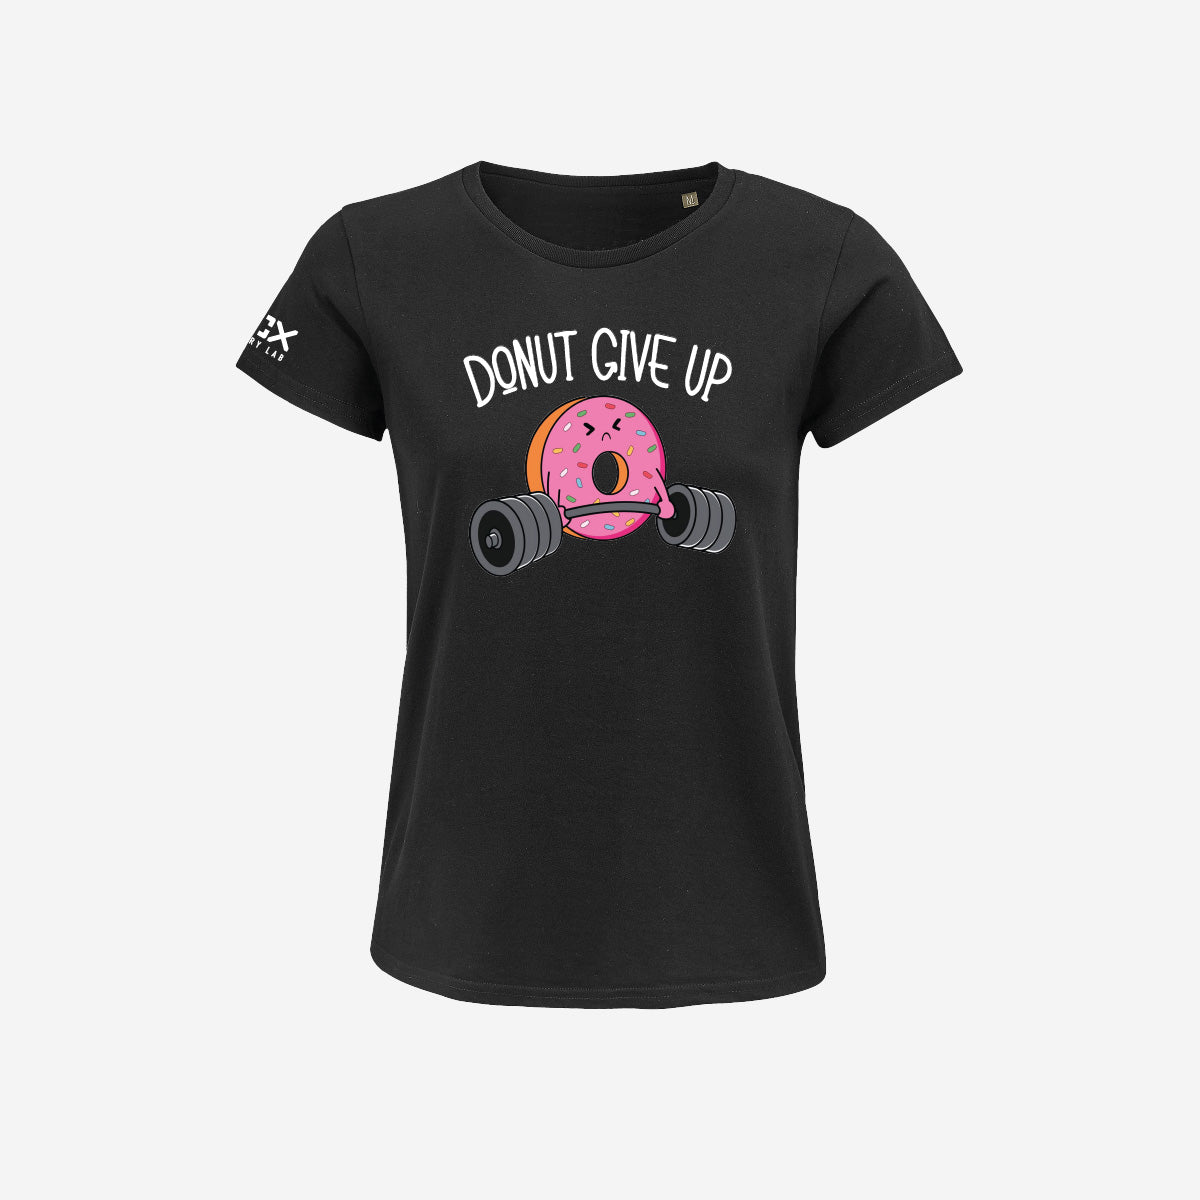 T-shirt Donna - Donut give up